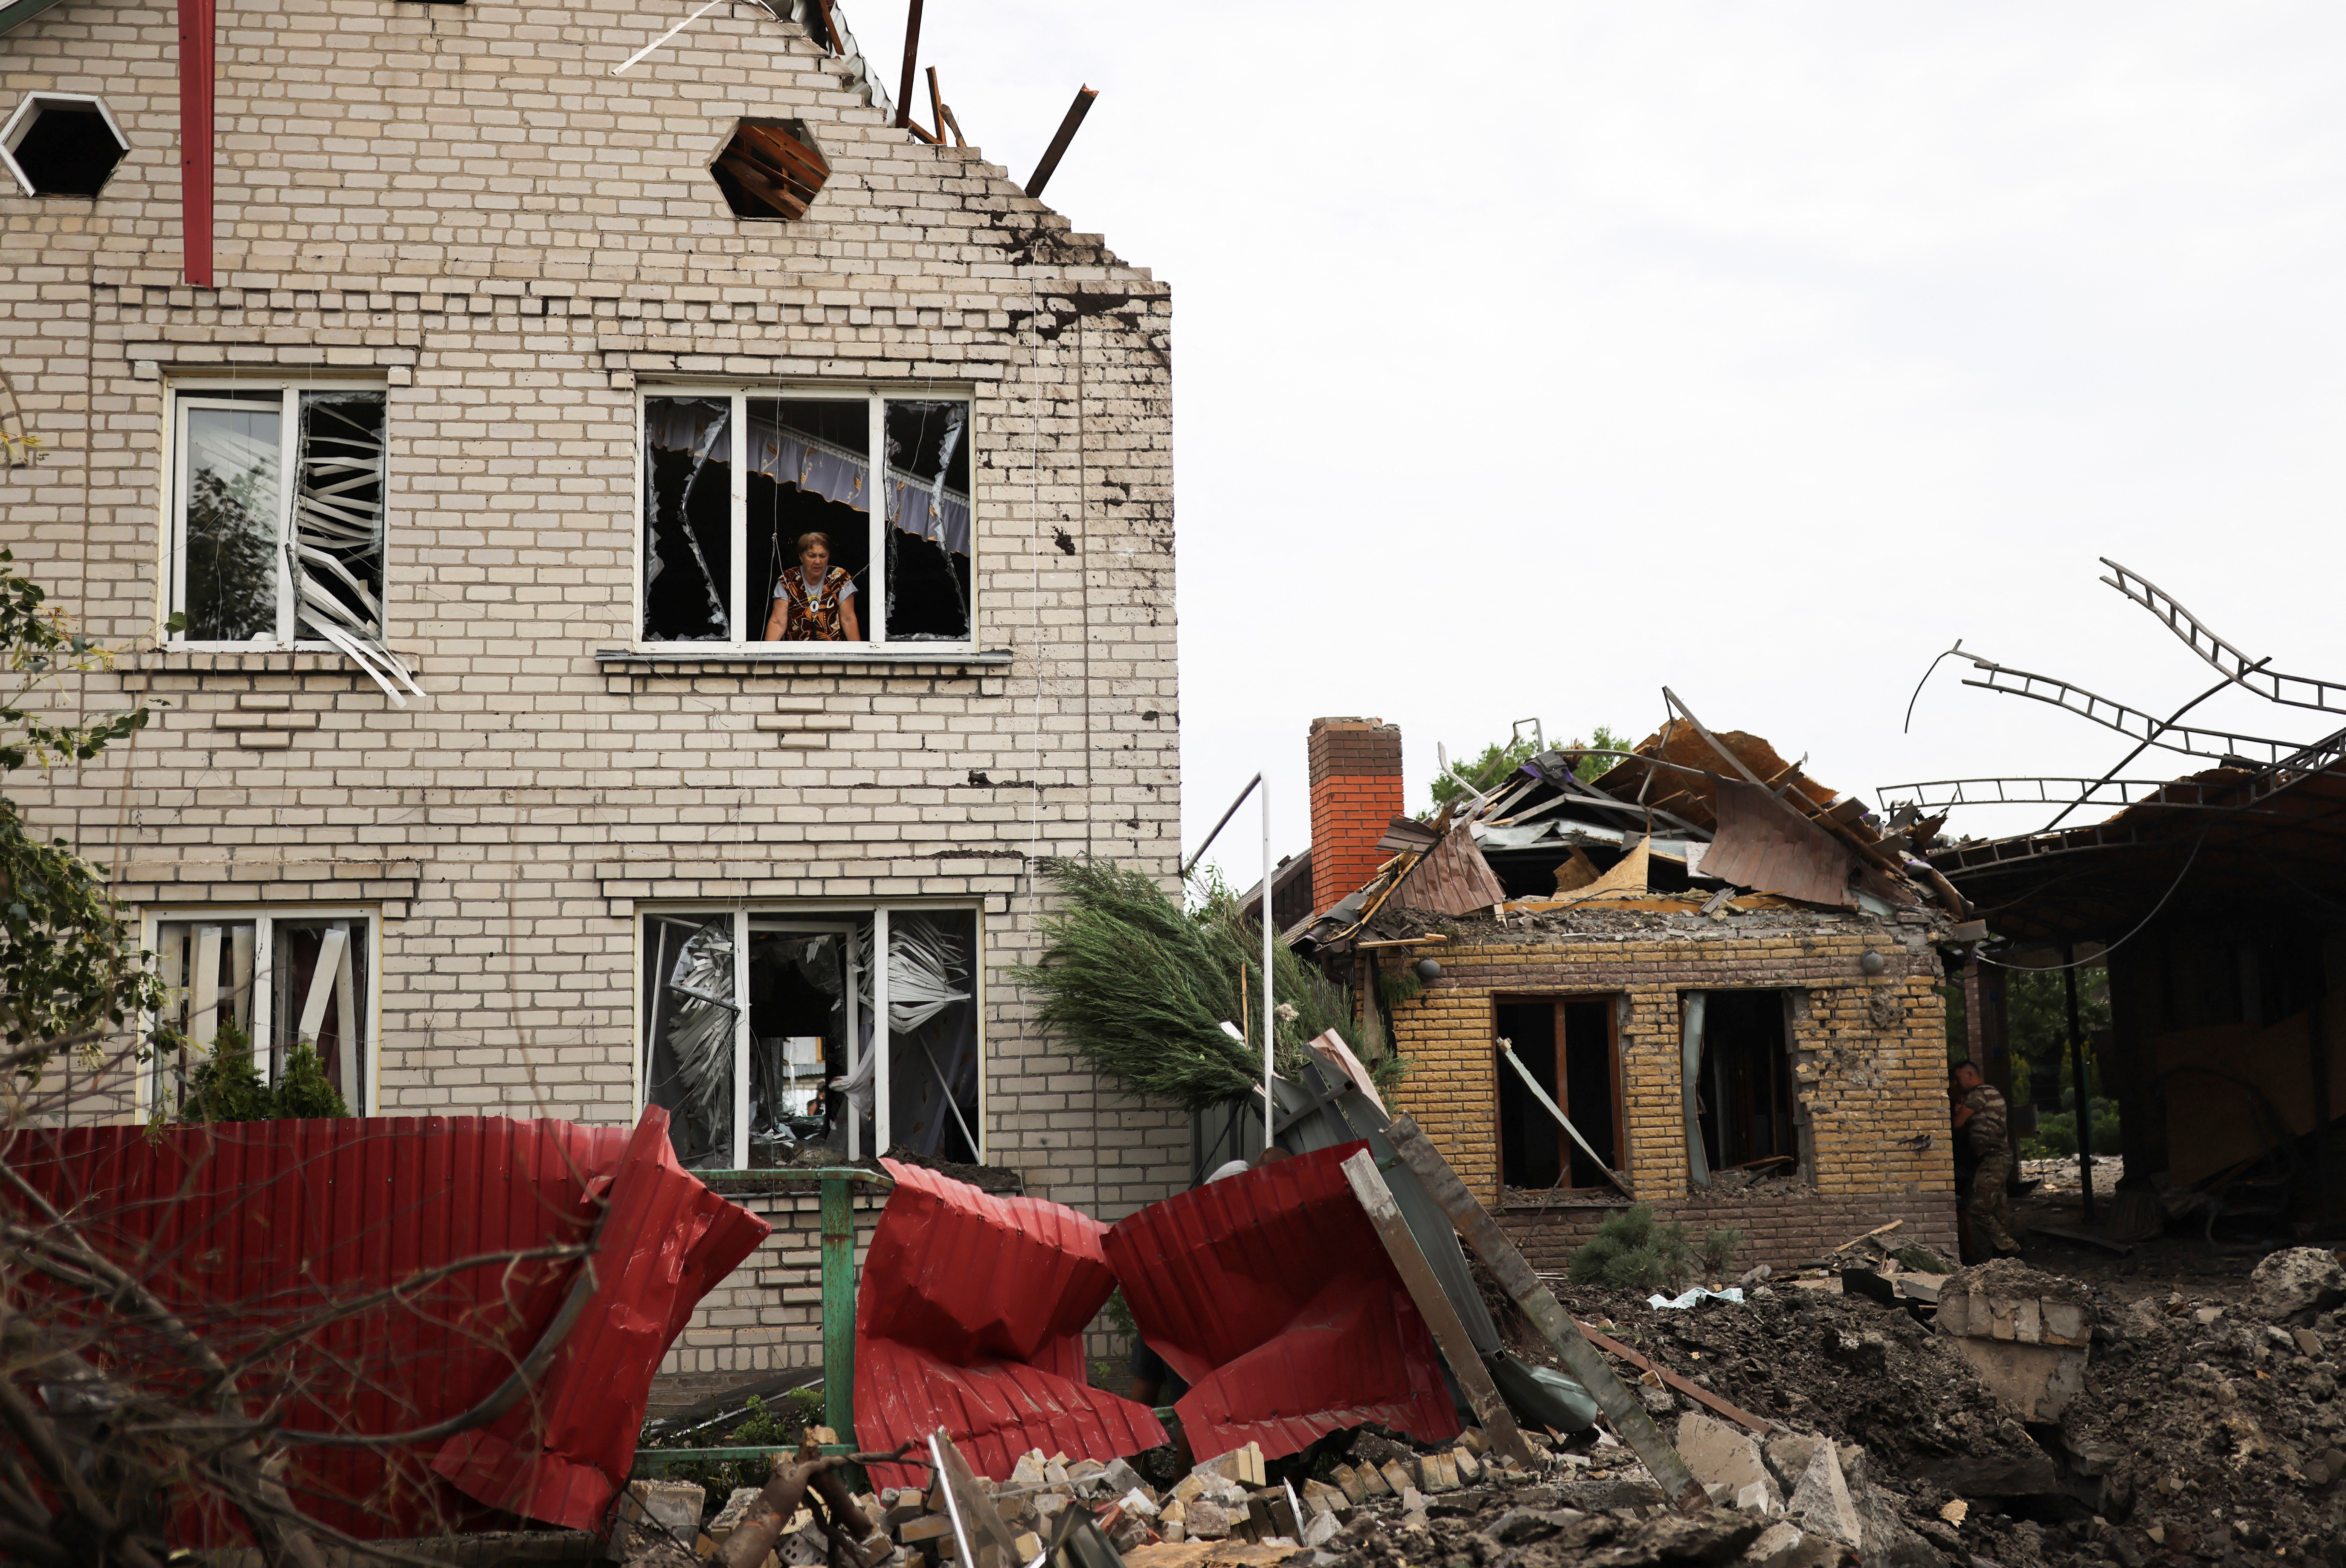 Iryna looks at destroyed houses, after military strikes in Kramatorsk